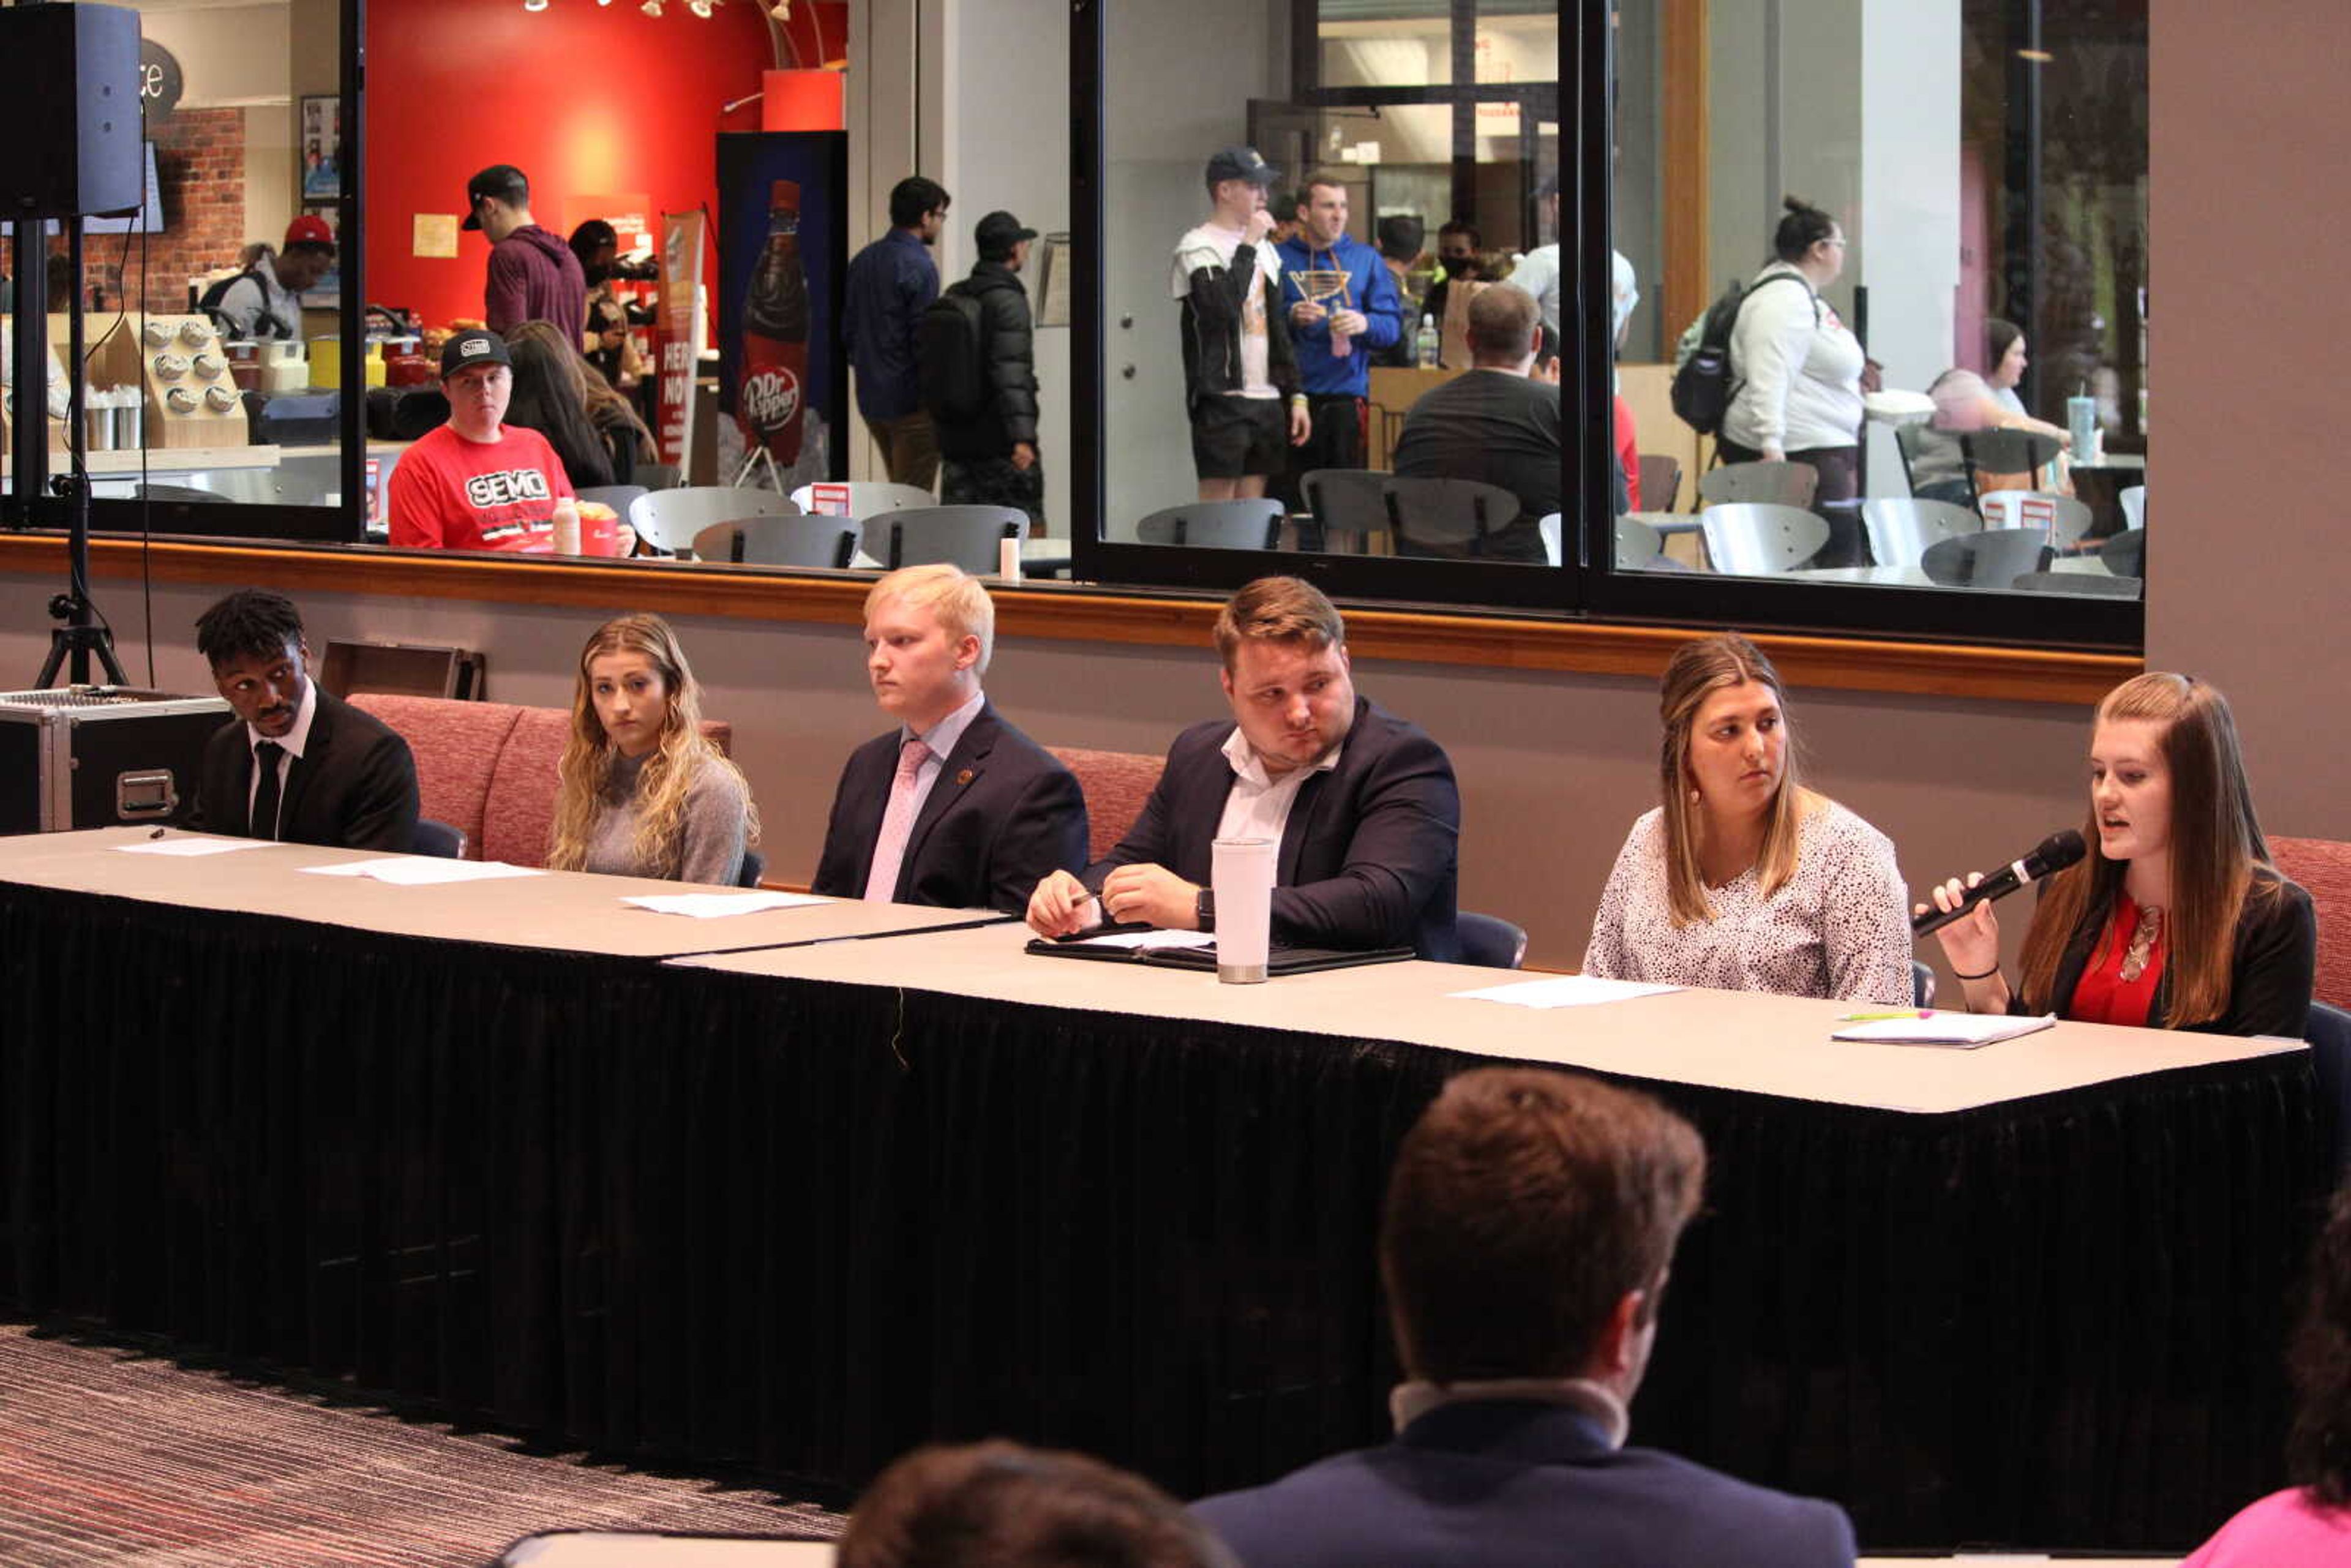 [From Left to Right] SGA election candidates Tyrell Gilwater, Sophie Machen, Luke Collins, Joel Philpott, Natalie Augustyn and Heather Hoffman participate in a debate on March 30. The debate was hosted by SGA and allowed students to learn more about the candidates wanting to represent them.